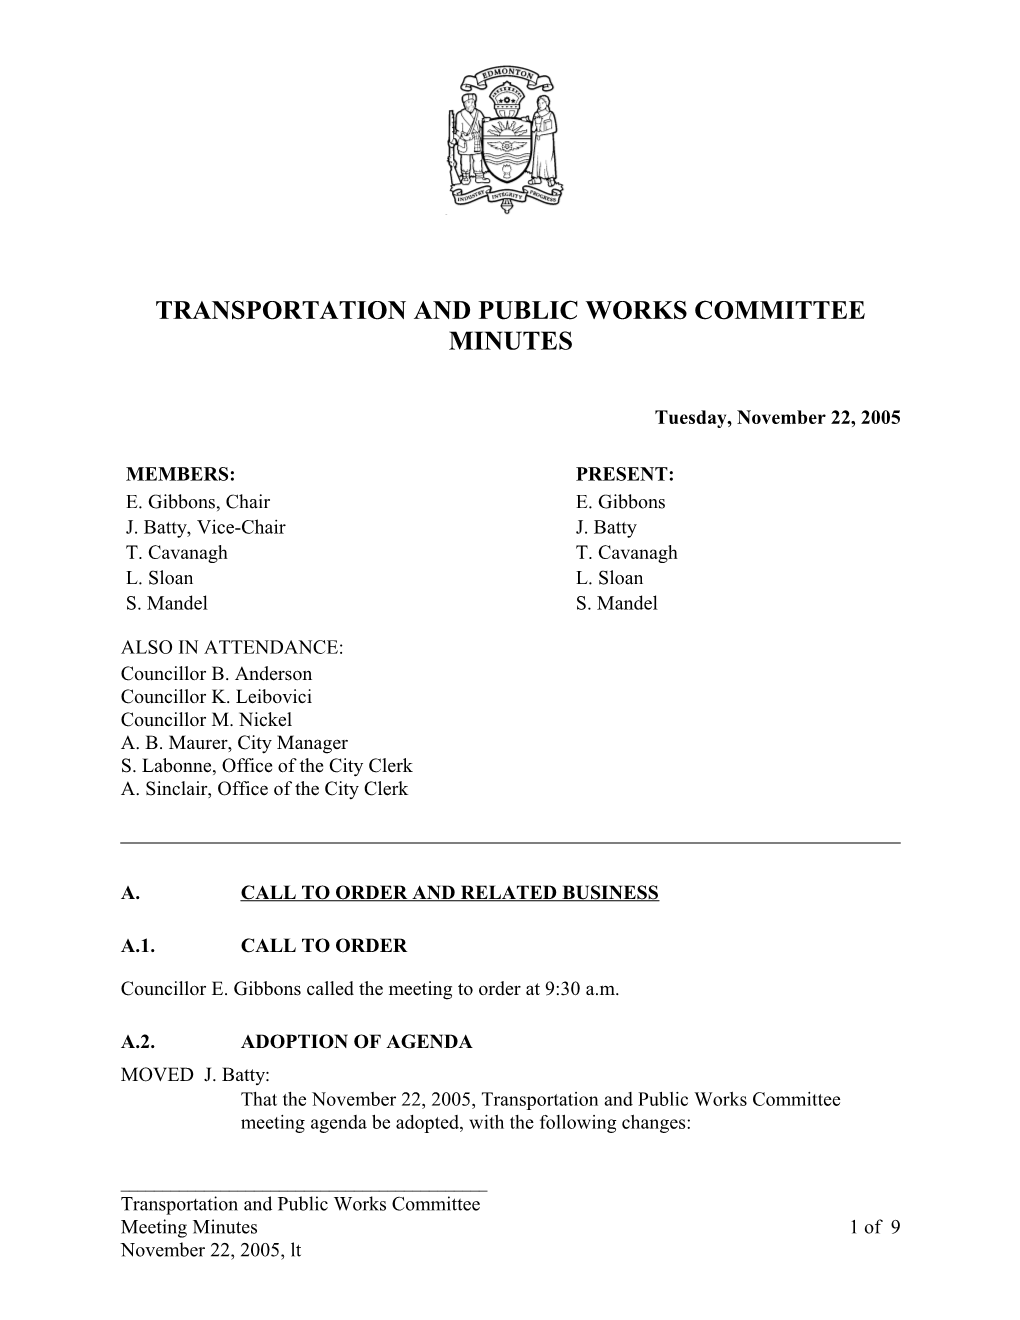 Minutes for Transportation and Public Works Committee November 22, 2005 Meeting